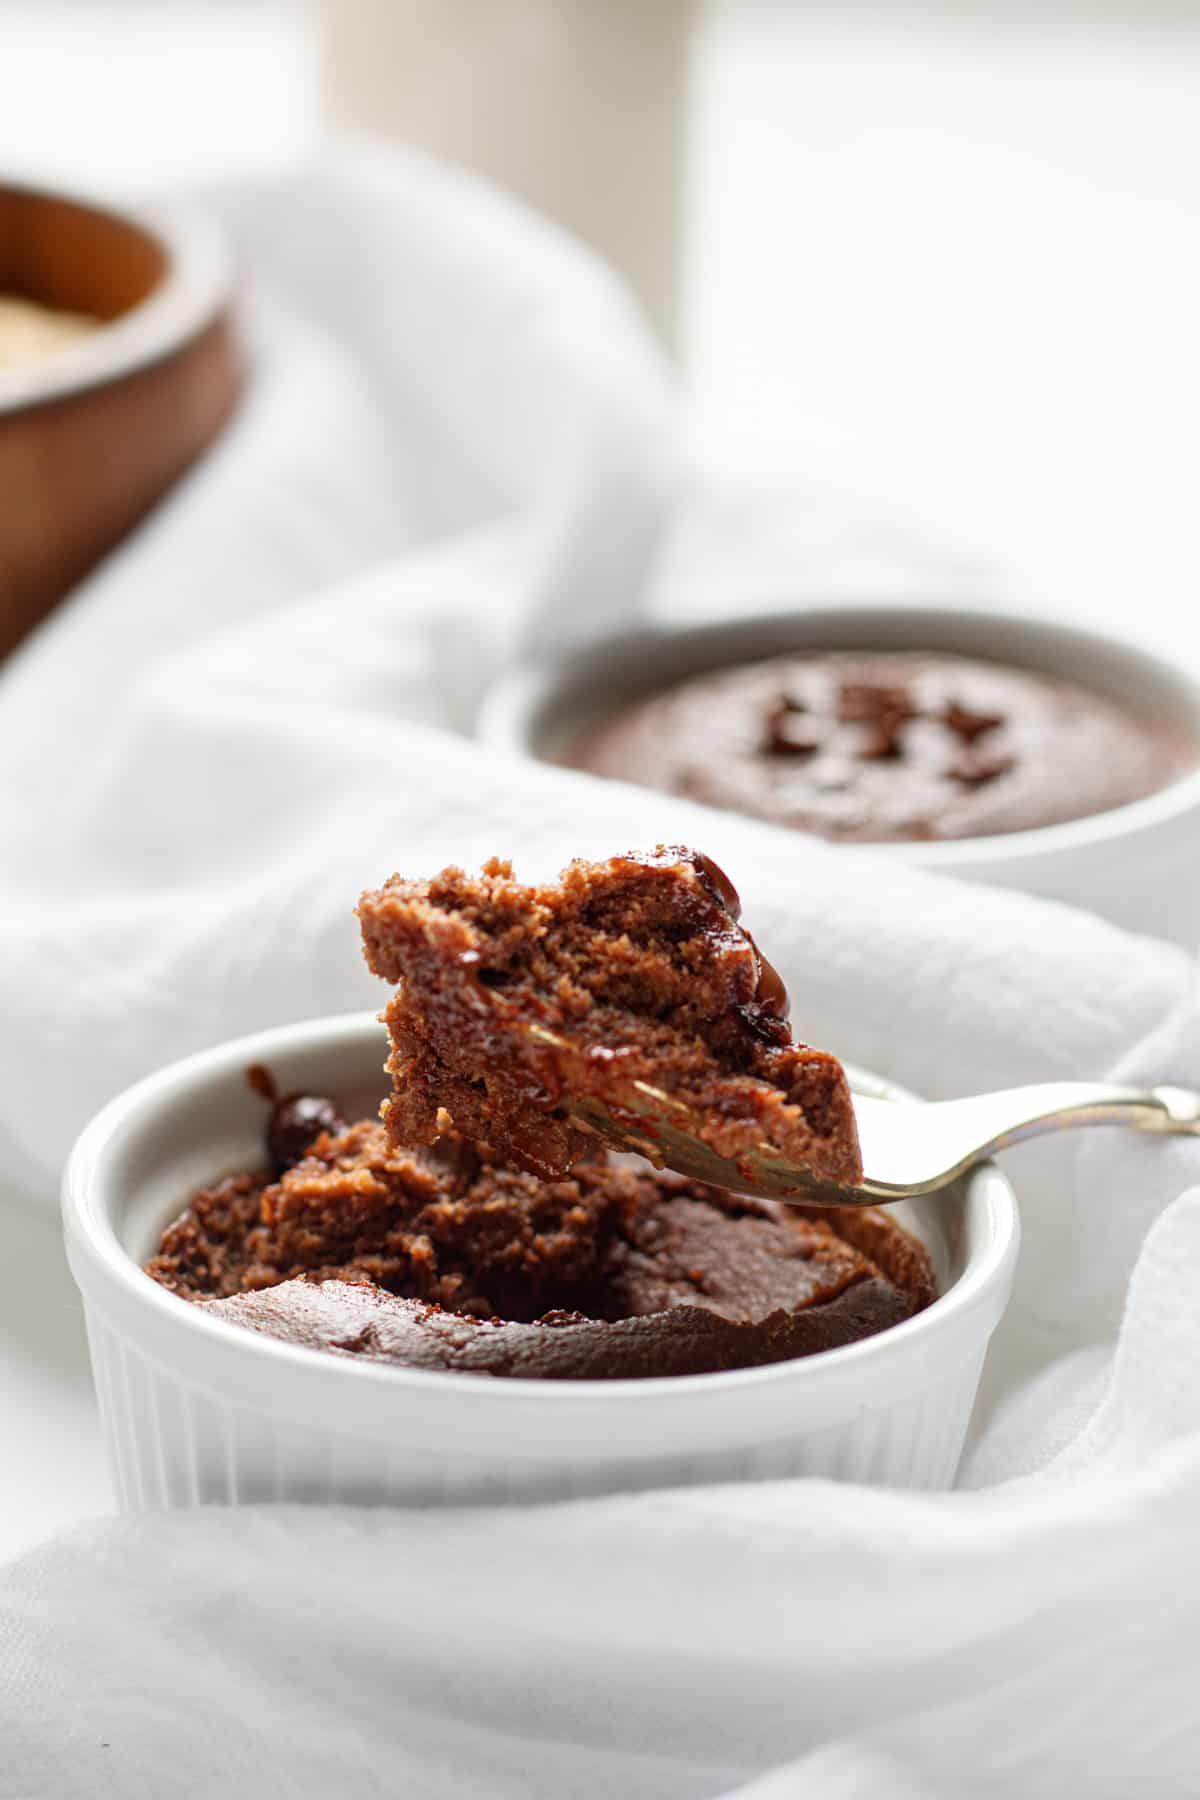 Spoonful of chocolate baked oatmeal.